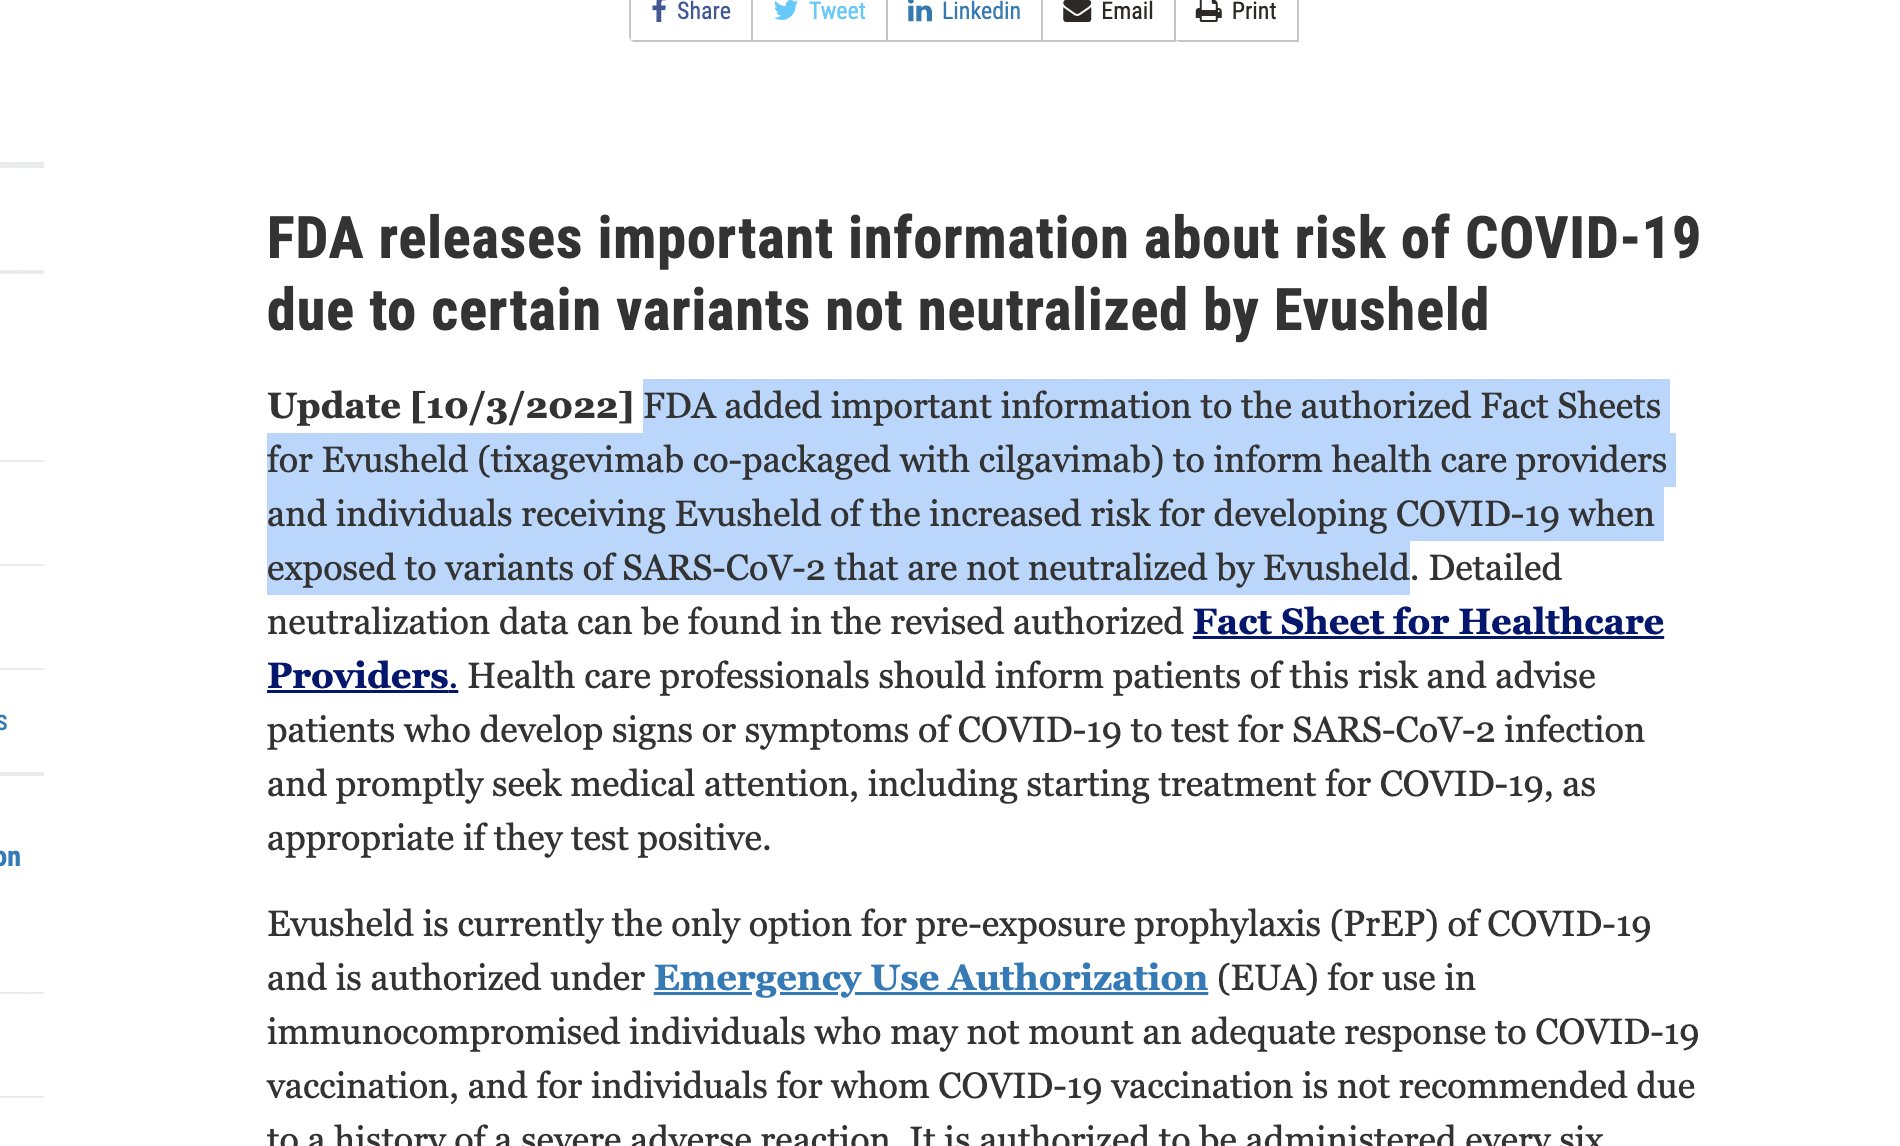 A screenshot from the webpage linked in this tweet. This sentence is highlighted: "FDA added important information to the authorized Fact Sheets for Evusheld (tixagevimab co-packaged with cilgavimab) to inform health care providers and individuals receiving Evusheld of the increased risk for developing COVID-19 when exposed to variants of SARS-CoV-2 that are not neutralized by Evusheld"